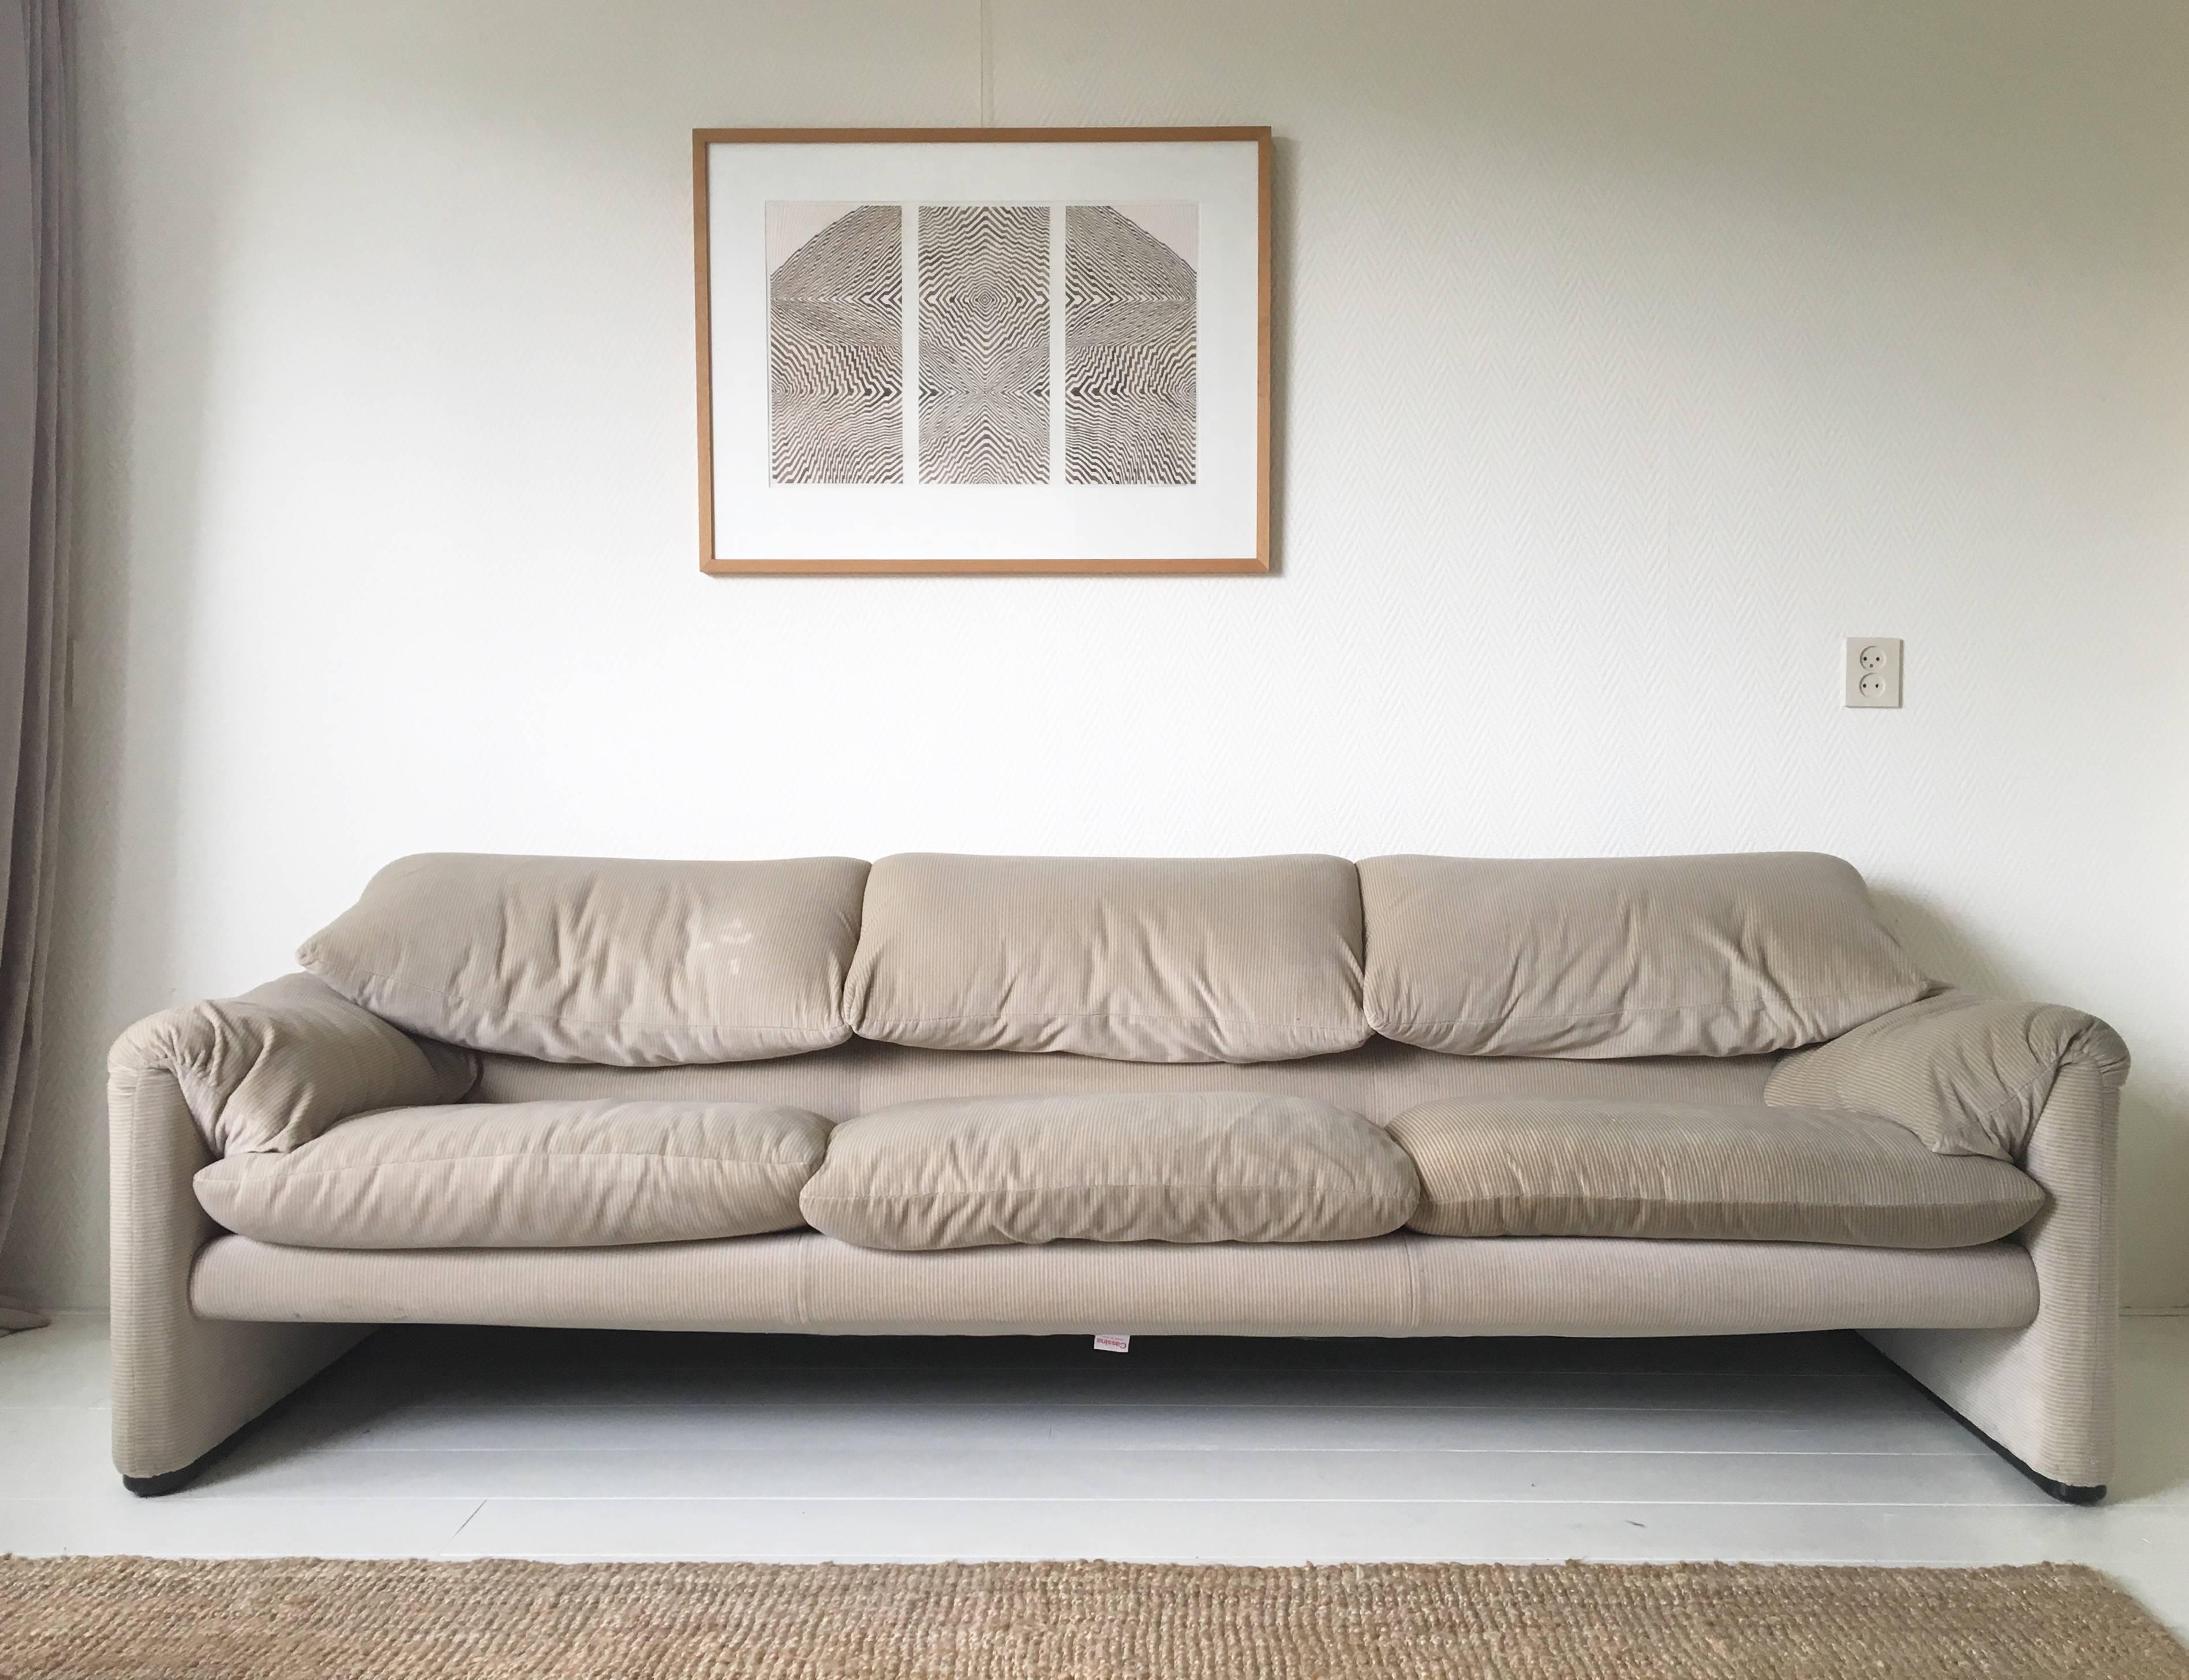 This large, comfortable and timeless sofa was designed by Vico Magistretti for Cassina, circa 1970s. It features a soft fabric with a subtl bi-color stripe pattern. How it's color is exactly to be seen, depends on how the light falls upon it. The